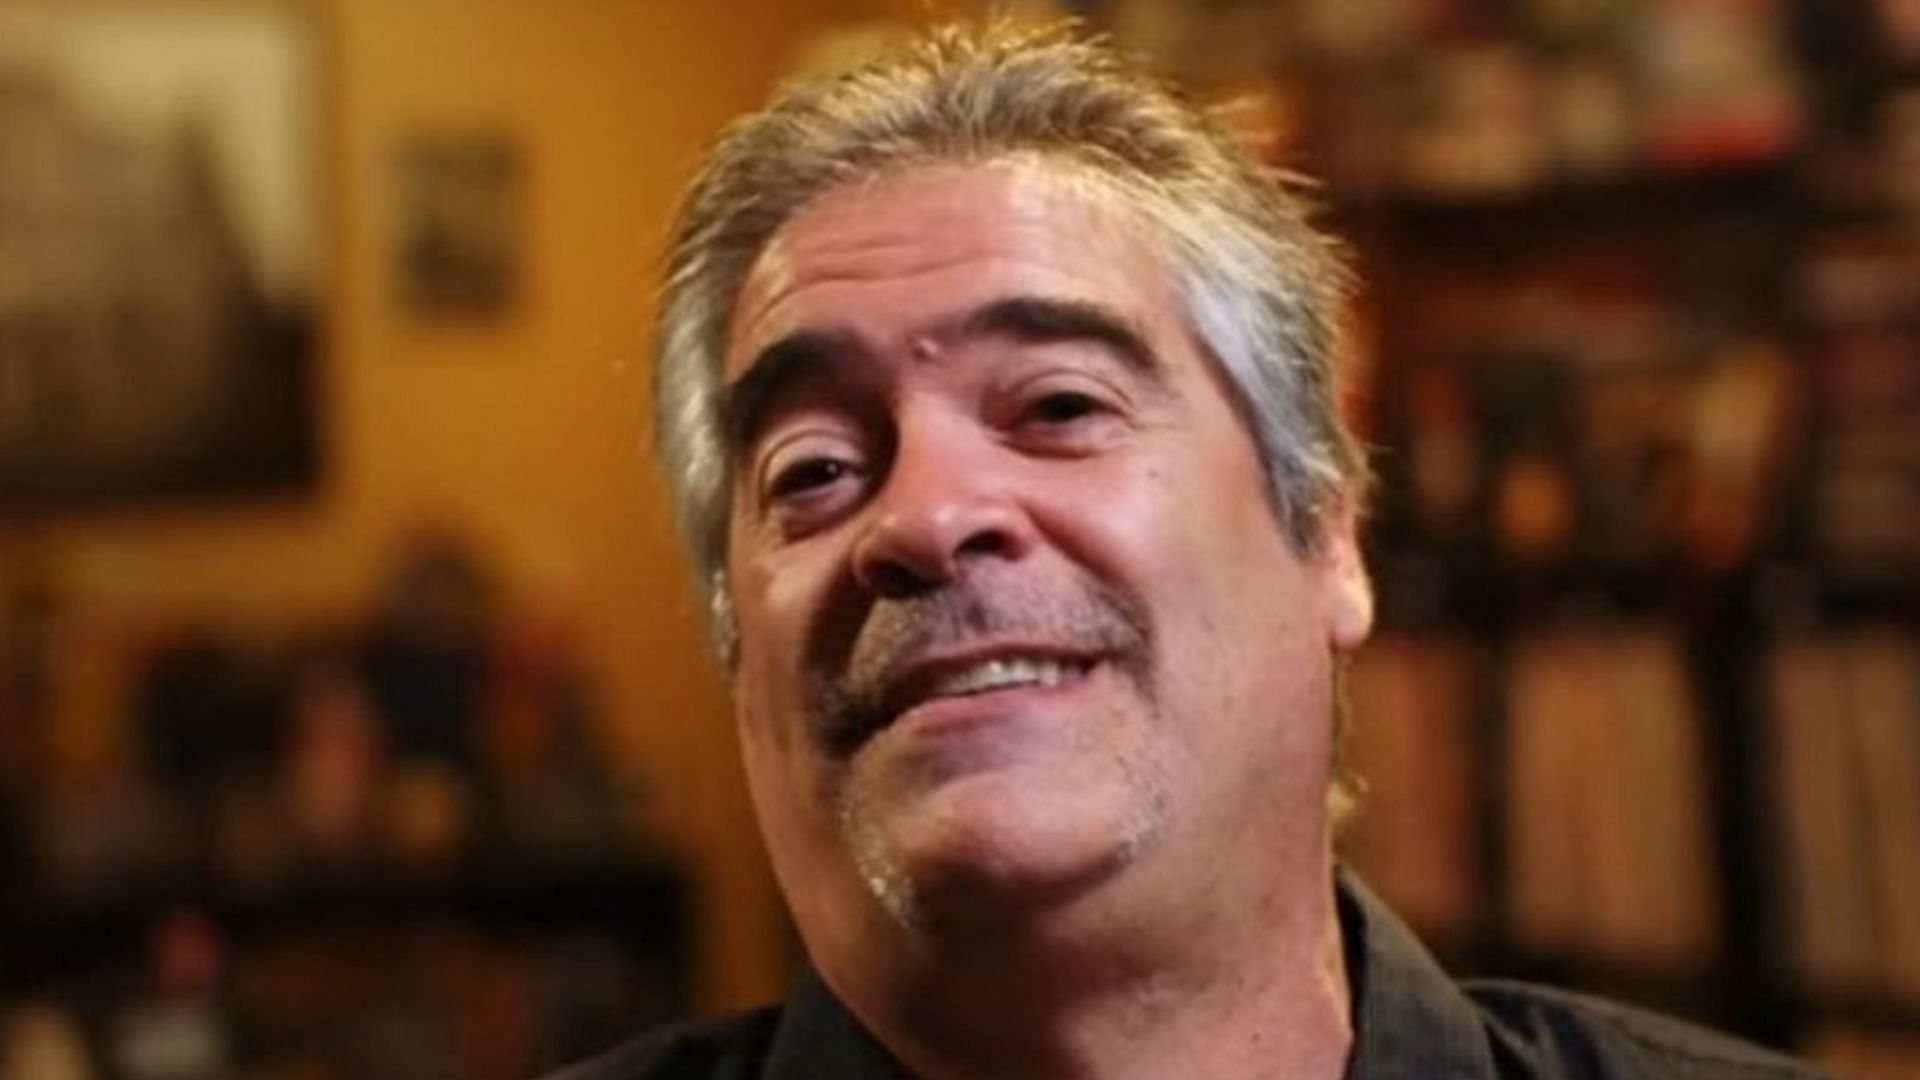 Vince Russo is a big fan of a former WWE personality